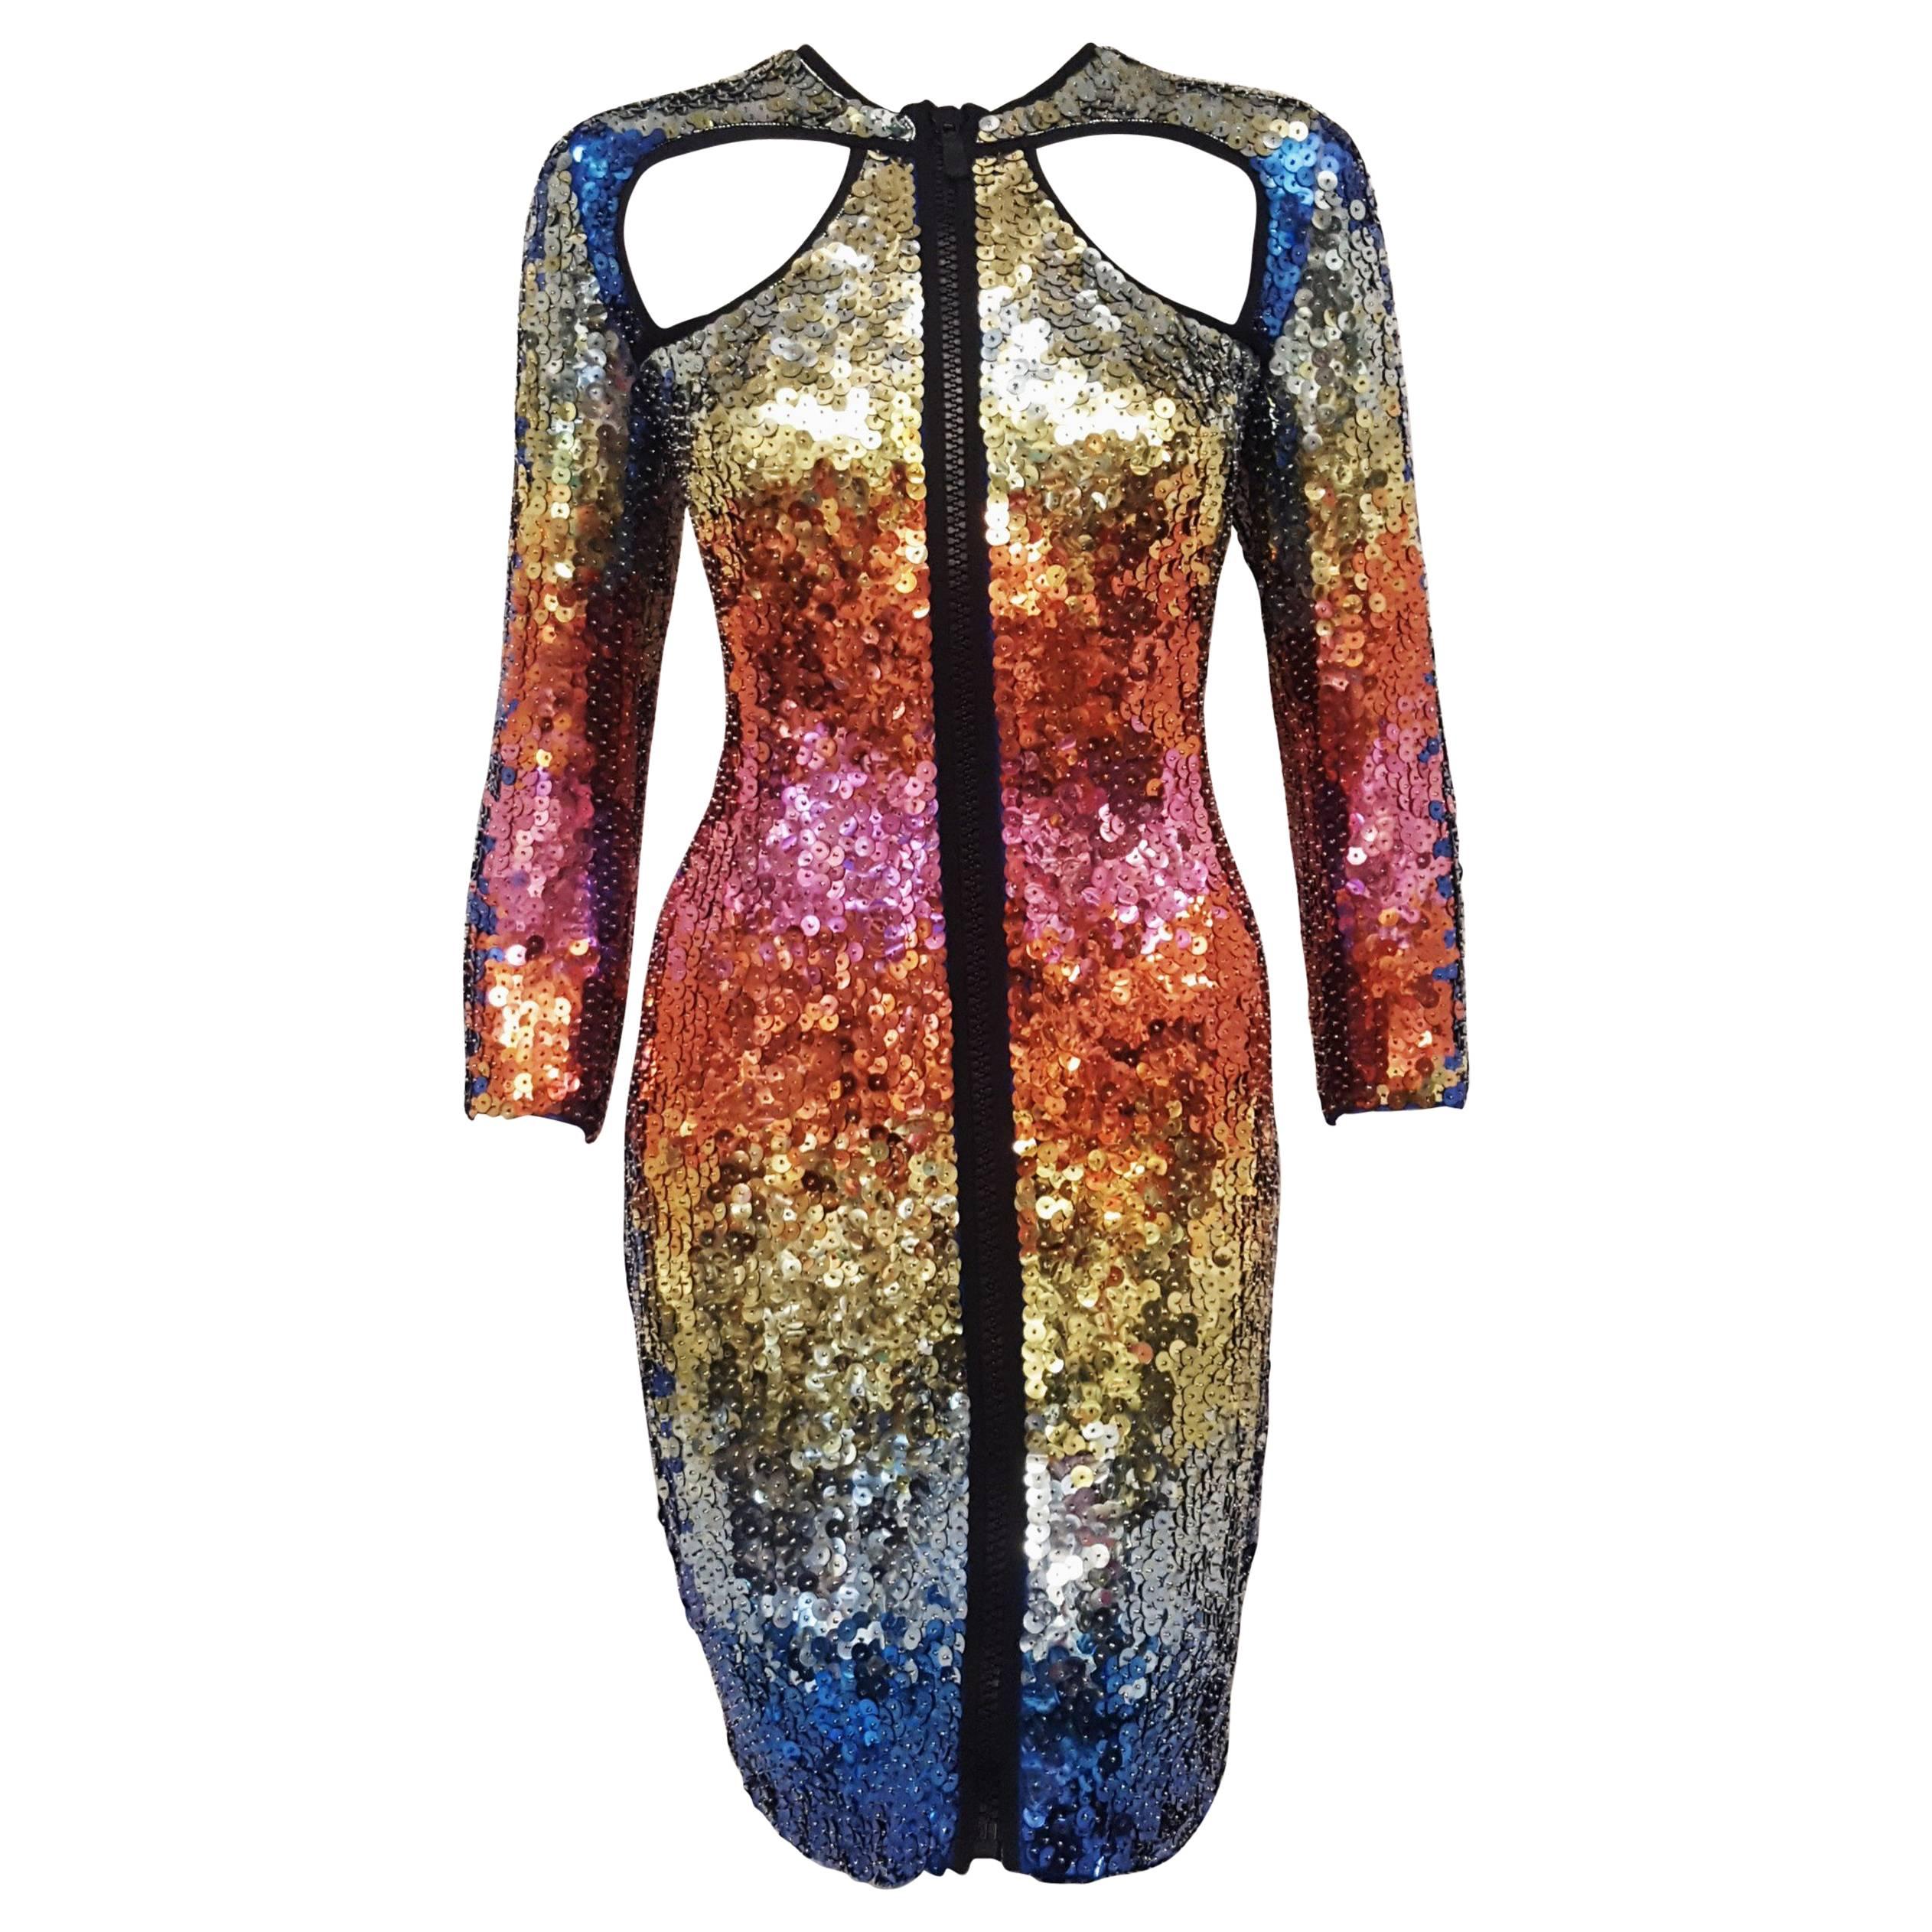 Emilio Pucci Kaleidoscopic Colors Sequined Dress with Front and Back Cut Outs   